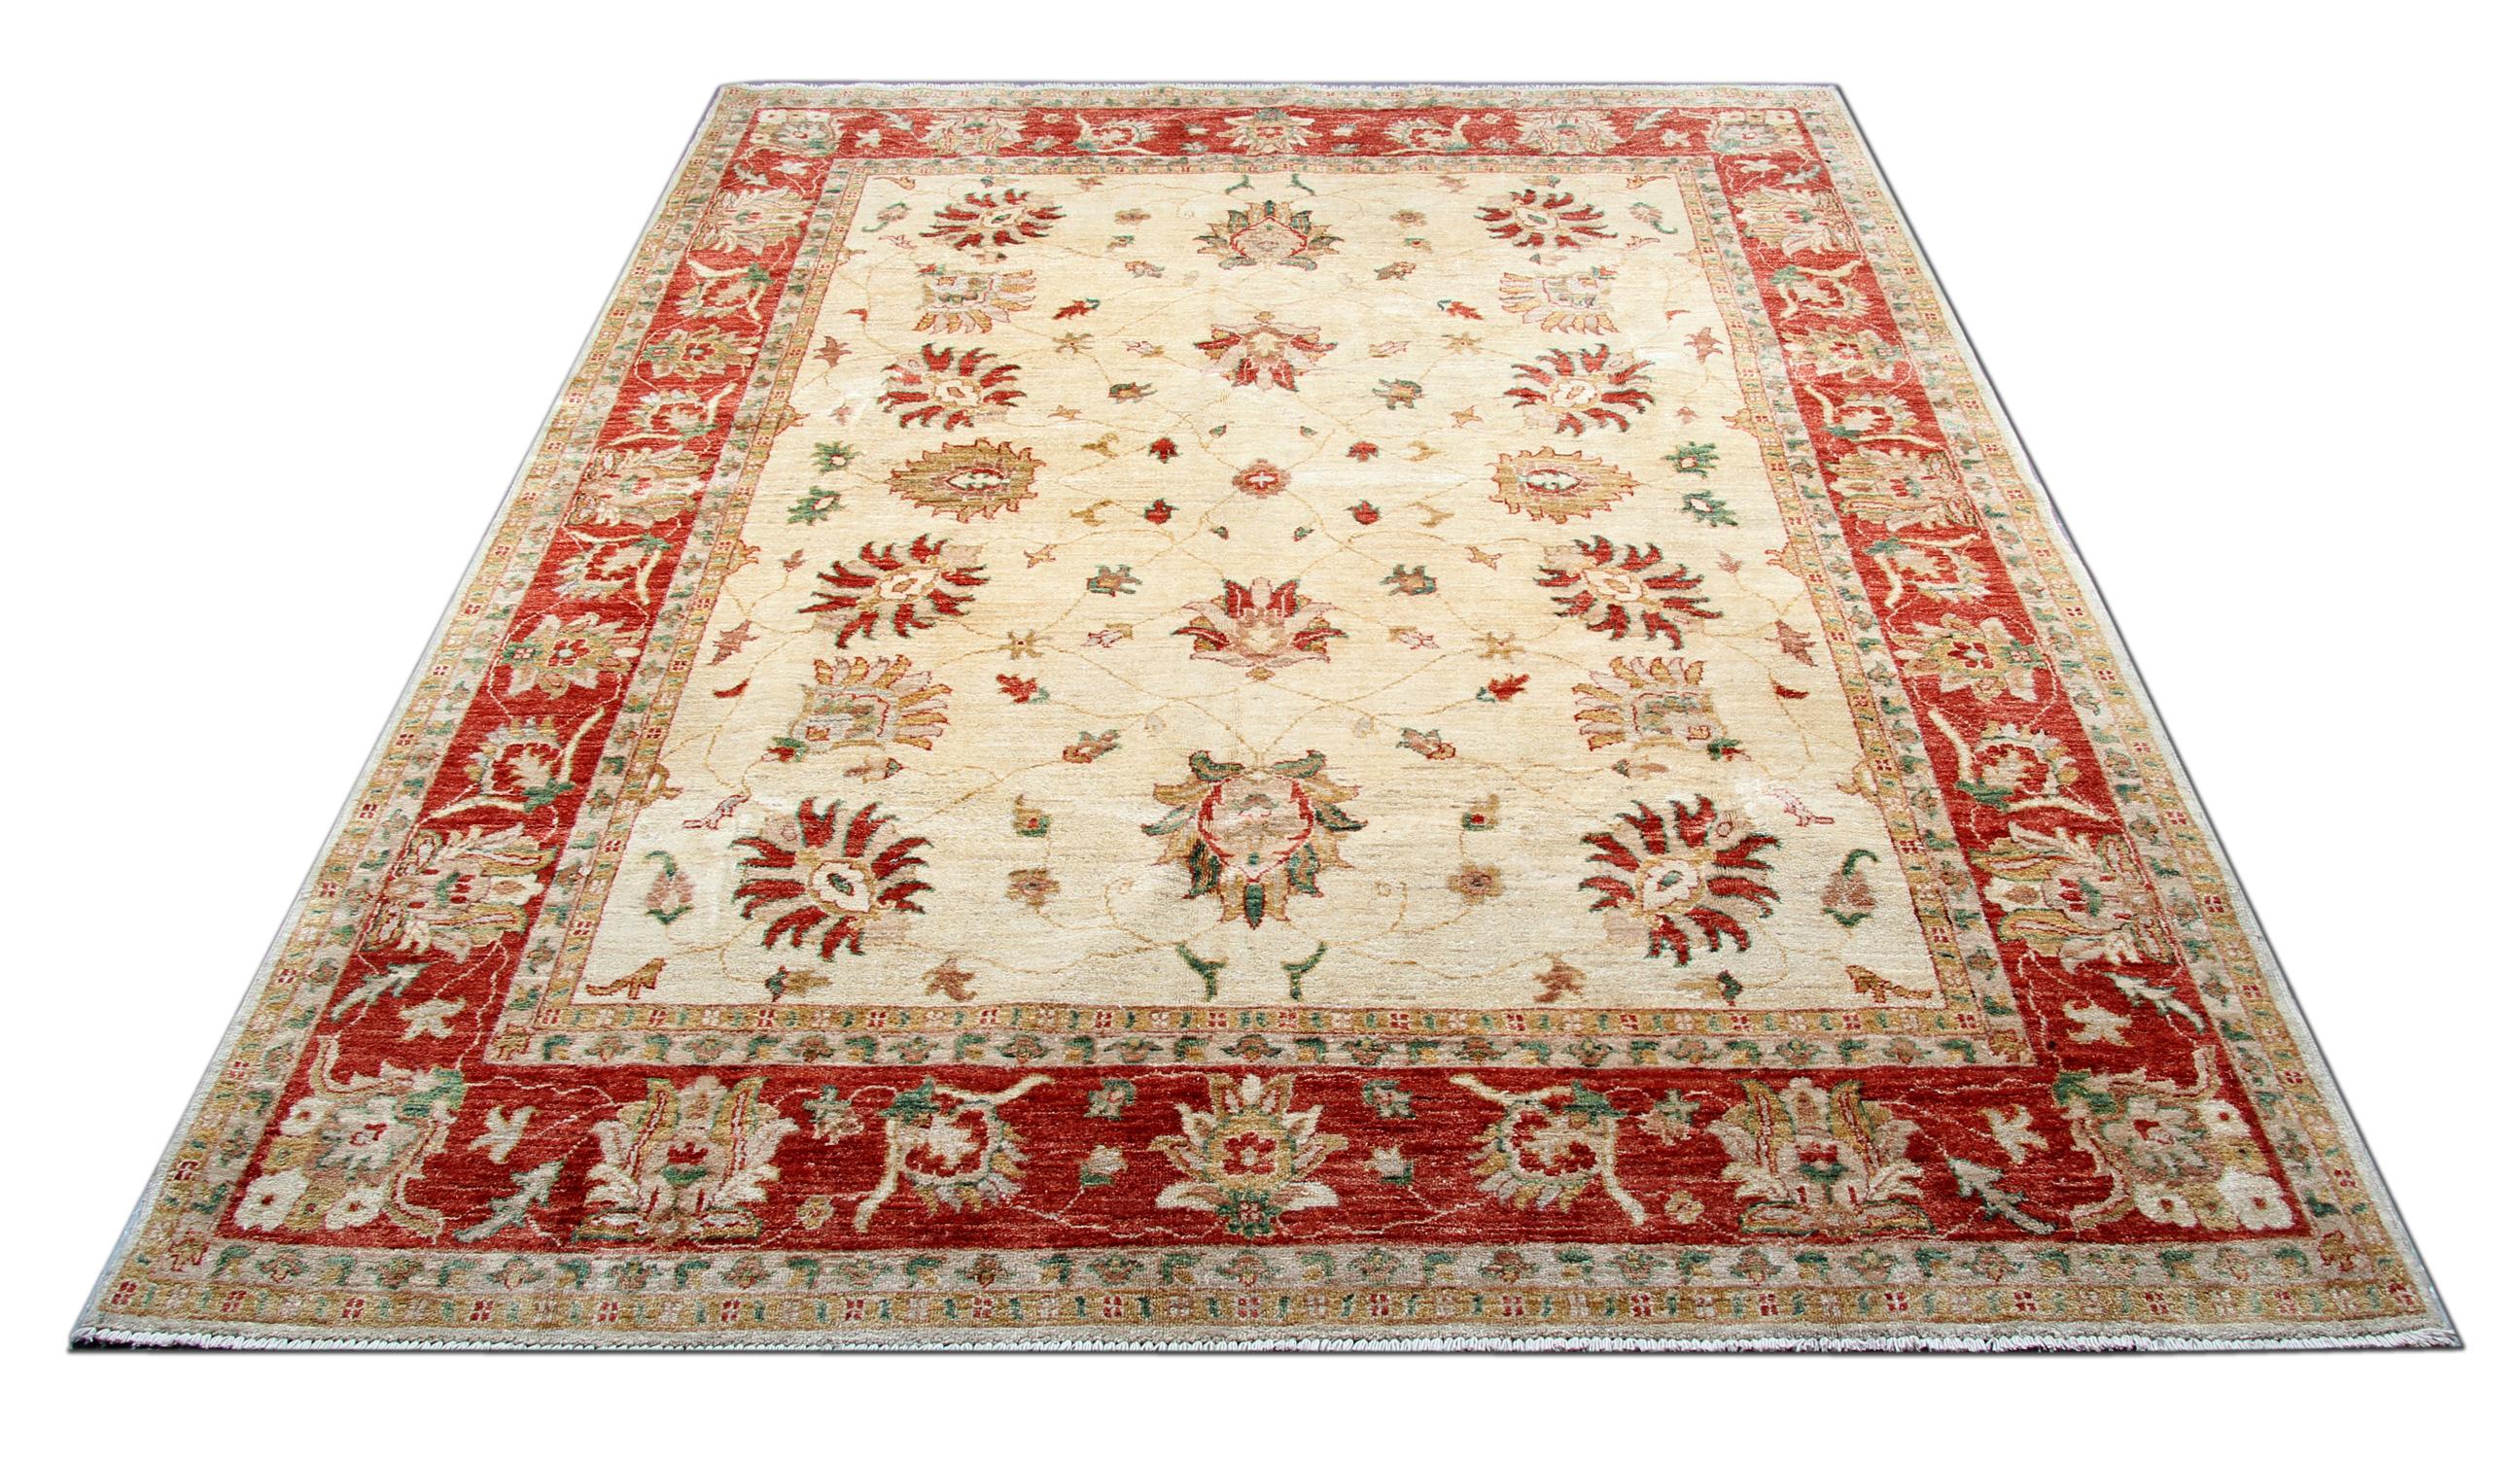 This is Ziegler Sultanabad runner was constructed on our own looms by our master weavers in Afghanistan, it is made with all-natural vegetable dyes all hand-spun wool. The large-scale design featured in this rug is highly desirable. It is one of a